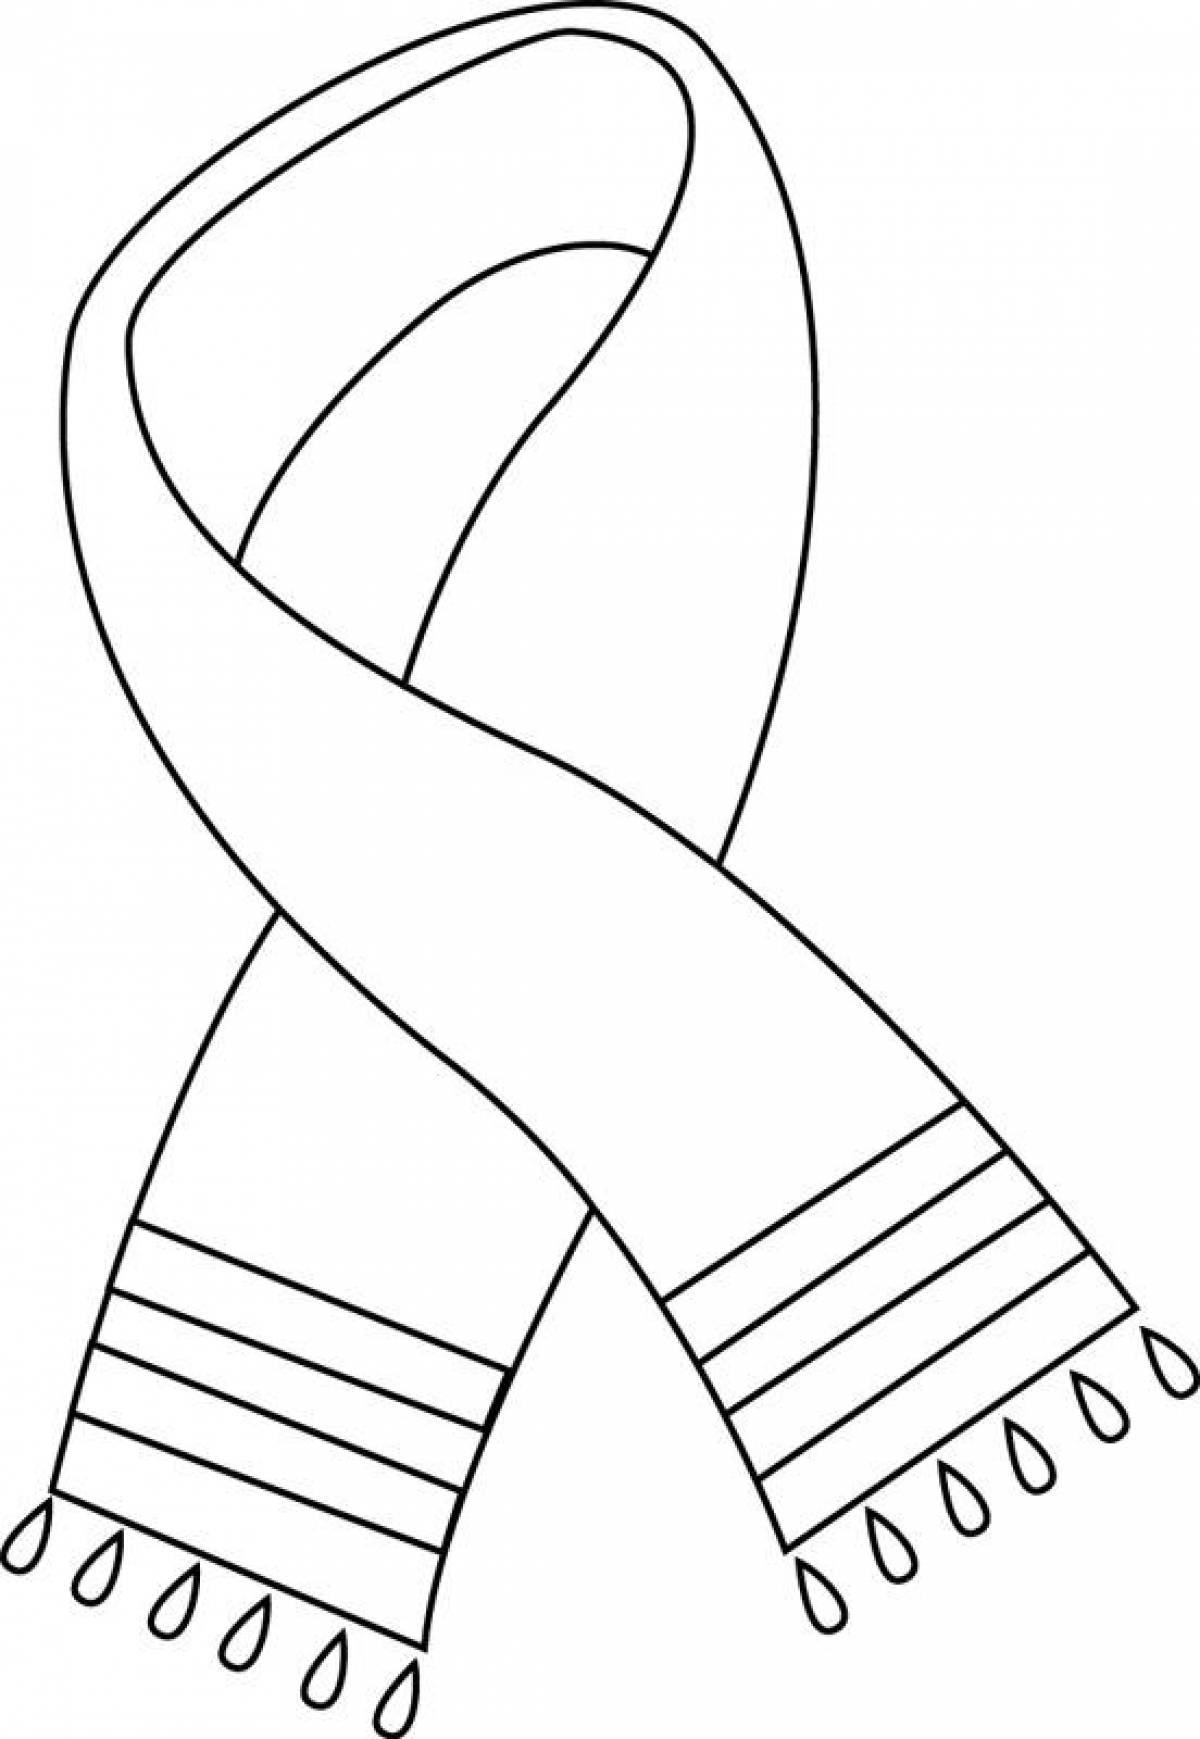 Flying scarf coloring page